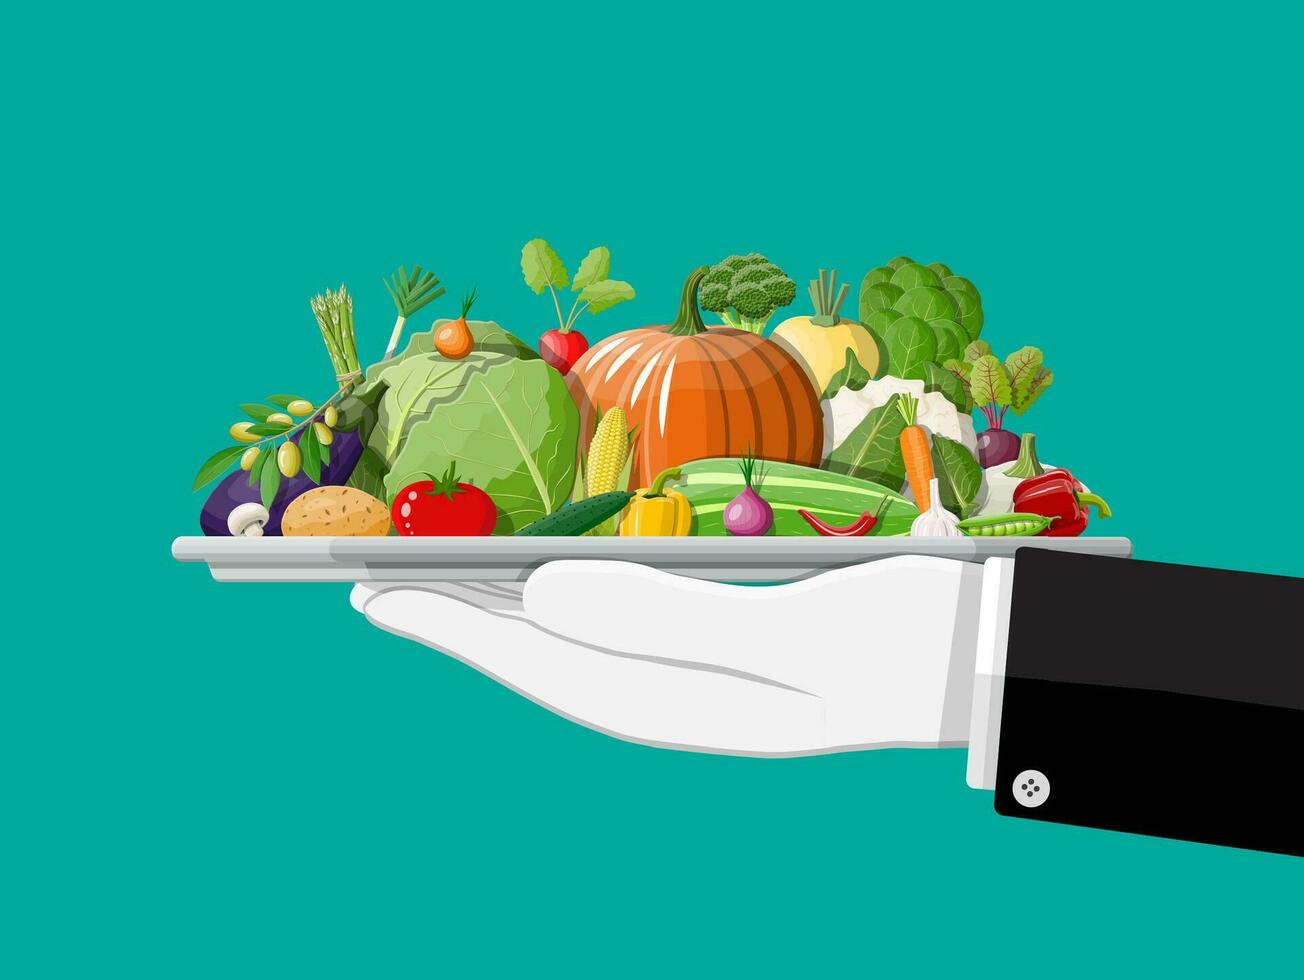 Tray full of vegetables in hand. Onion, eggplant, cabbage, pepper, pumpkin, cucumber, tomato carrot and other vegetables. Organic healthy food. Vegetarian nutrition. Vector illustration in flat style